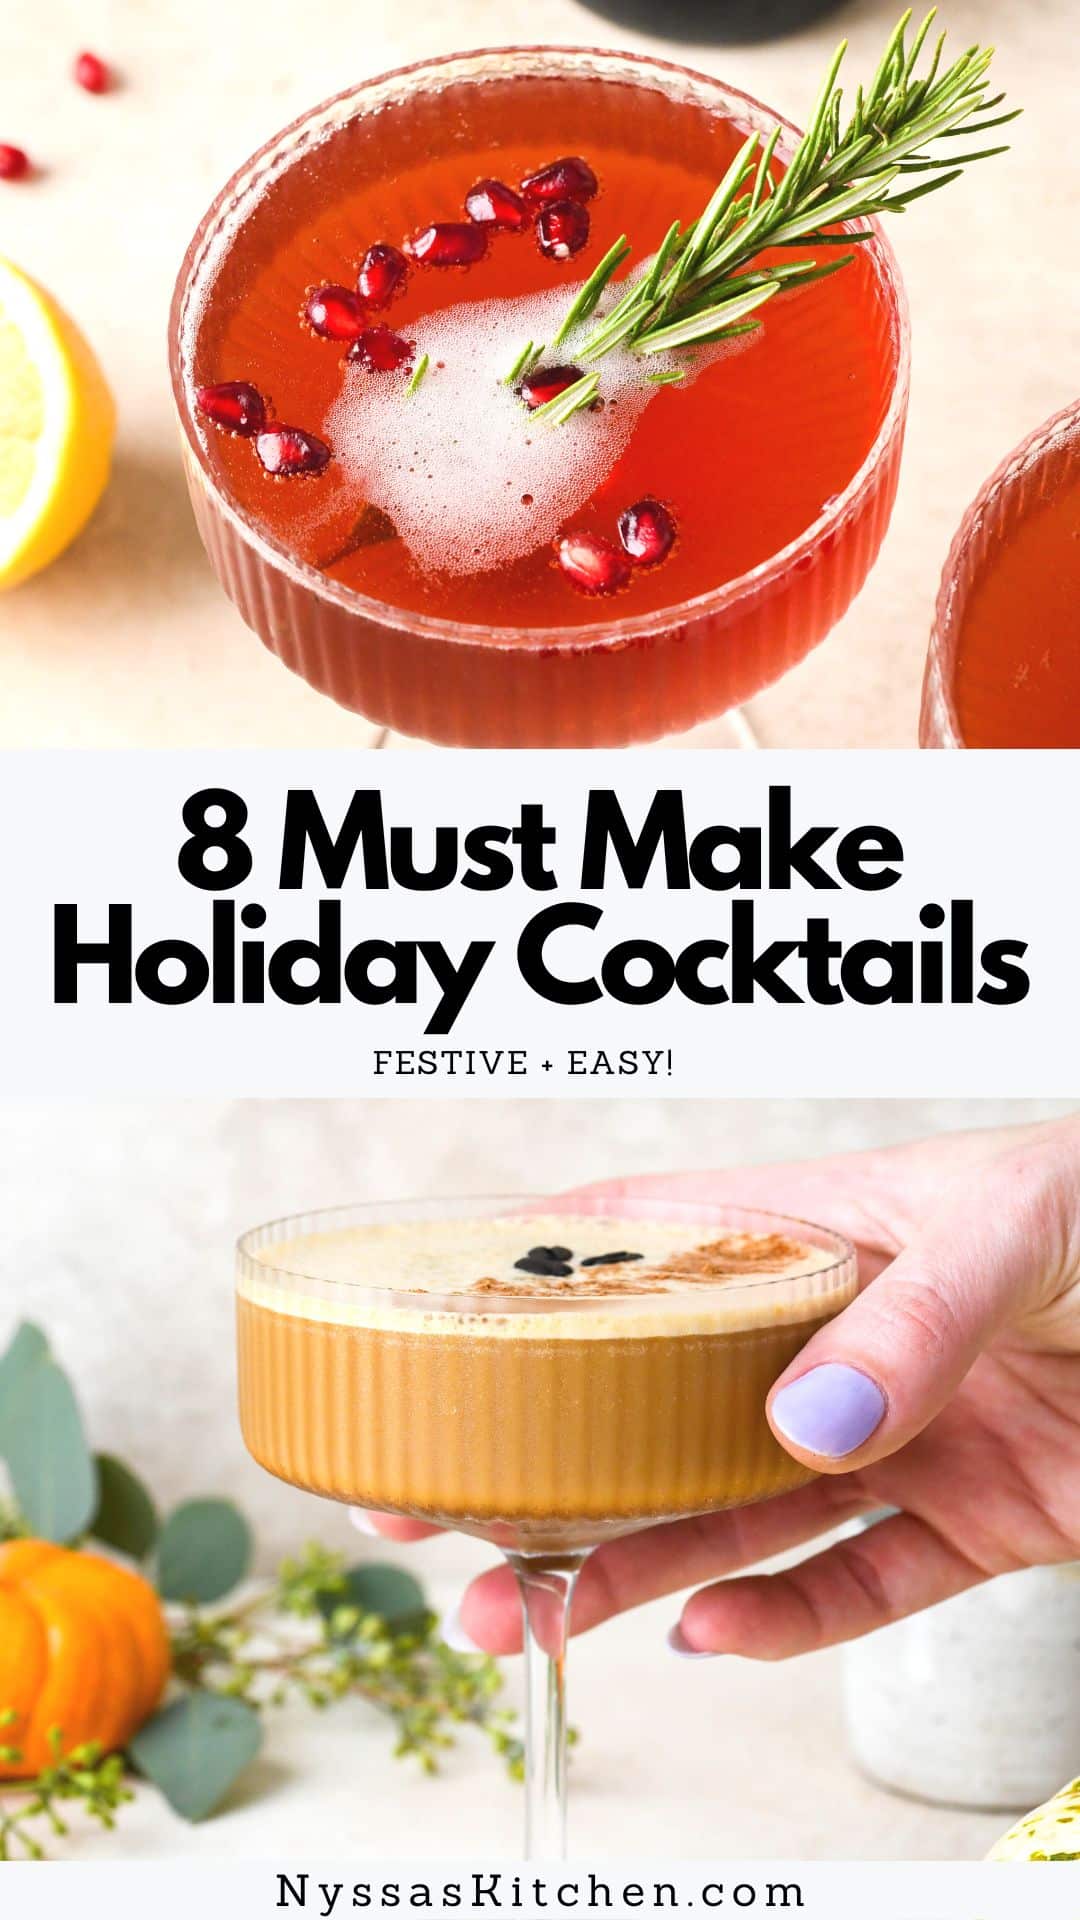 There is nothing quite as special and fun as a craft cocktail during the holiday season! Whether it's for a cocktail party or a cozy night in with family, your partner, a friend, or yourself, a fancy drink is the perfect way to take the festive vibe to the next level.